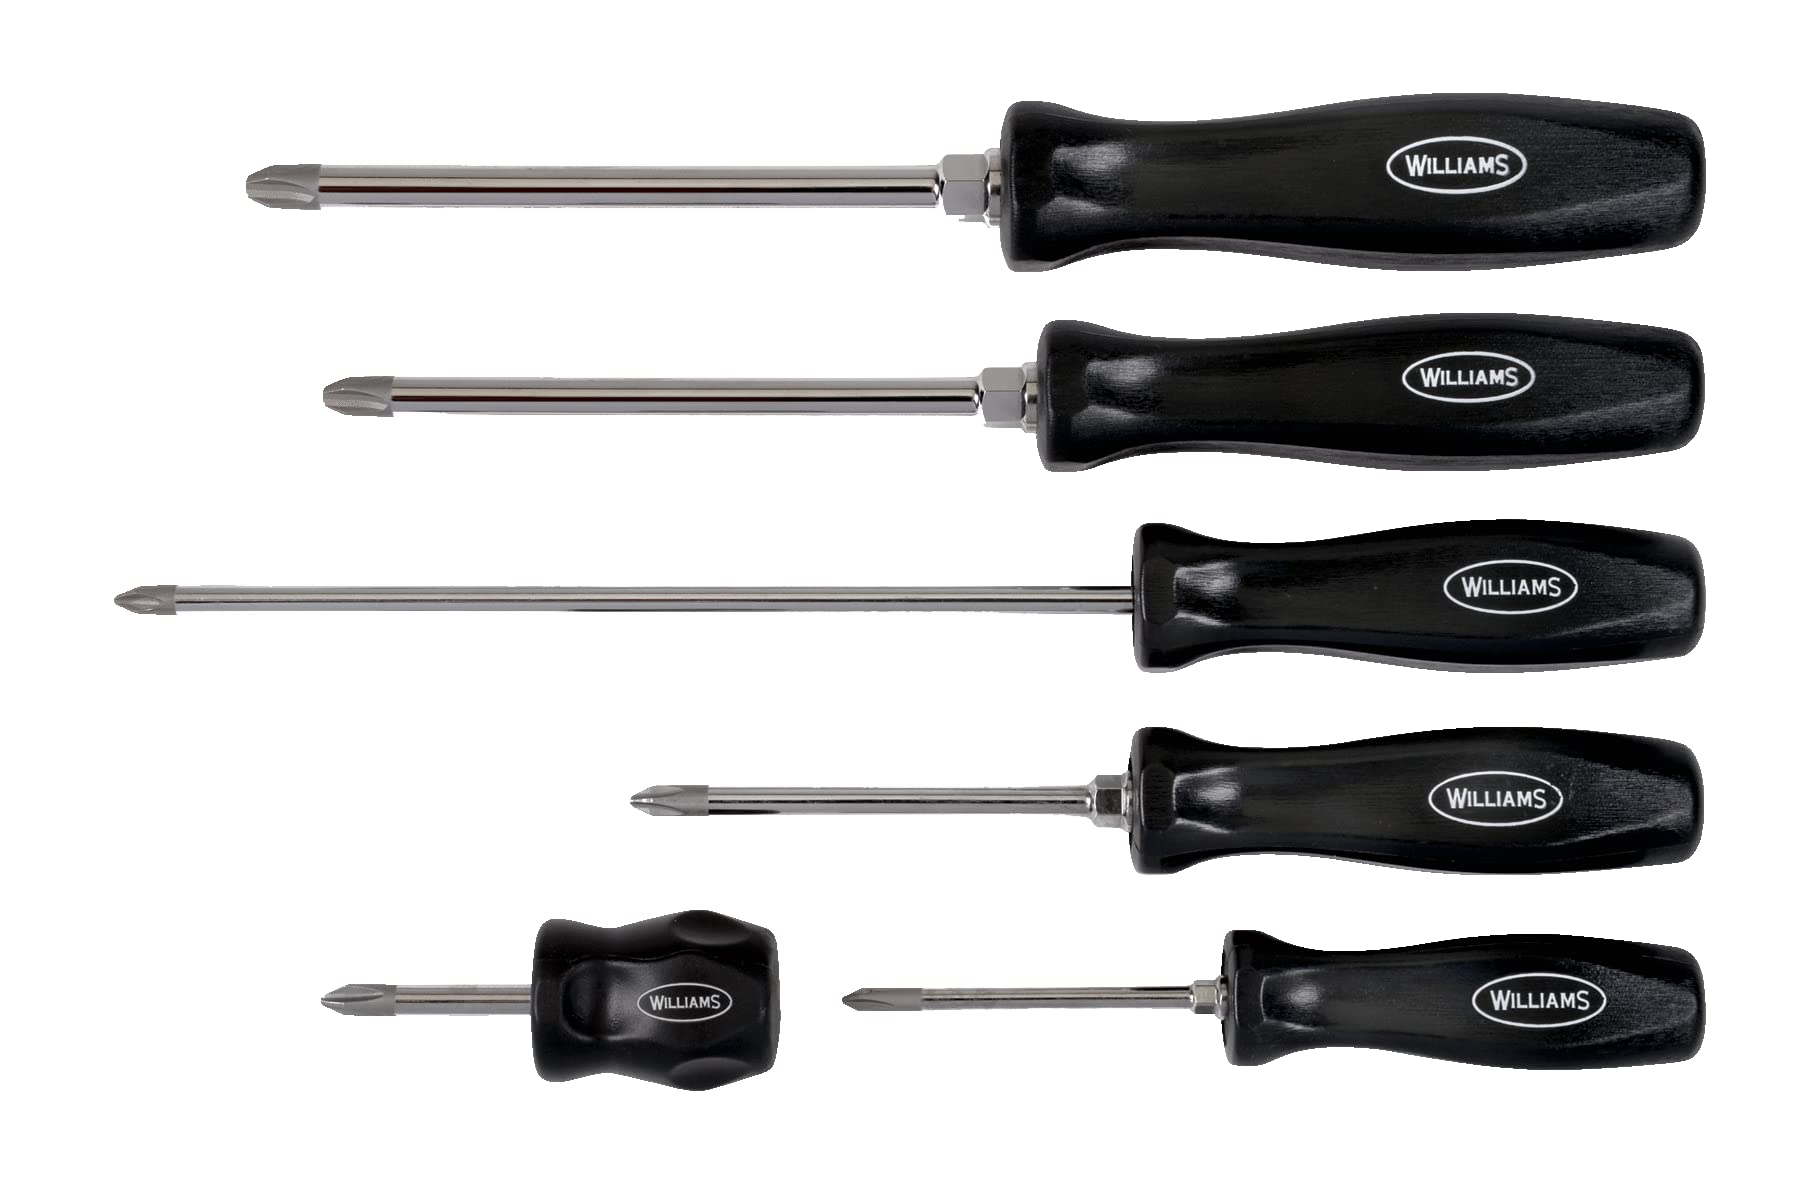 Williams 100P-6PD 6-Piece Premium Phillips Screwdriver Set by Snap-on Industrial Brand JH Williams 並行輸入品並行輸